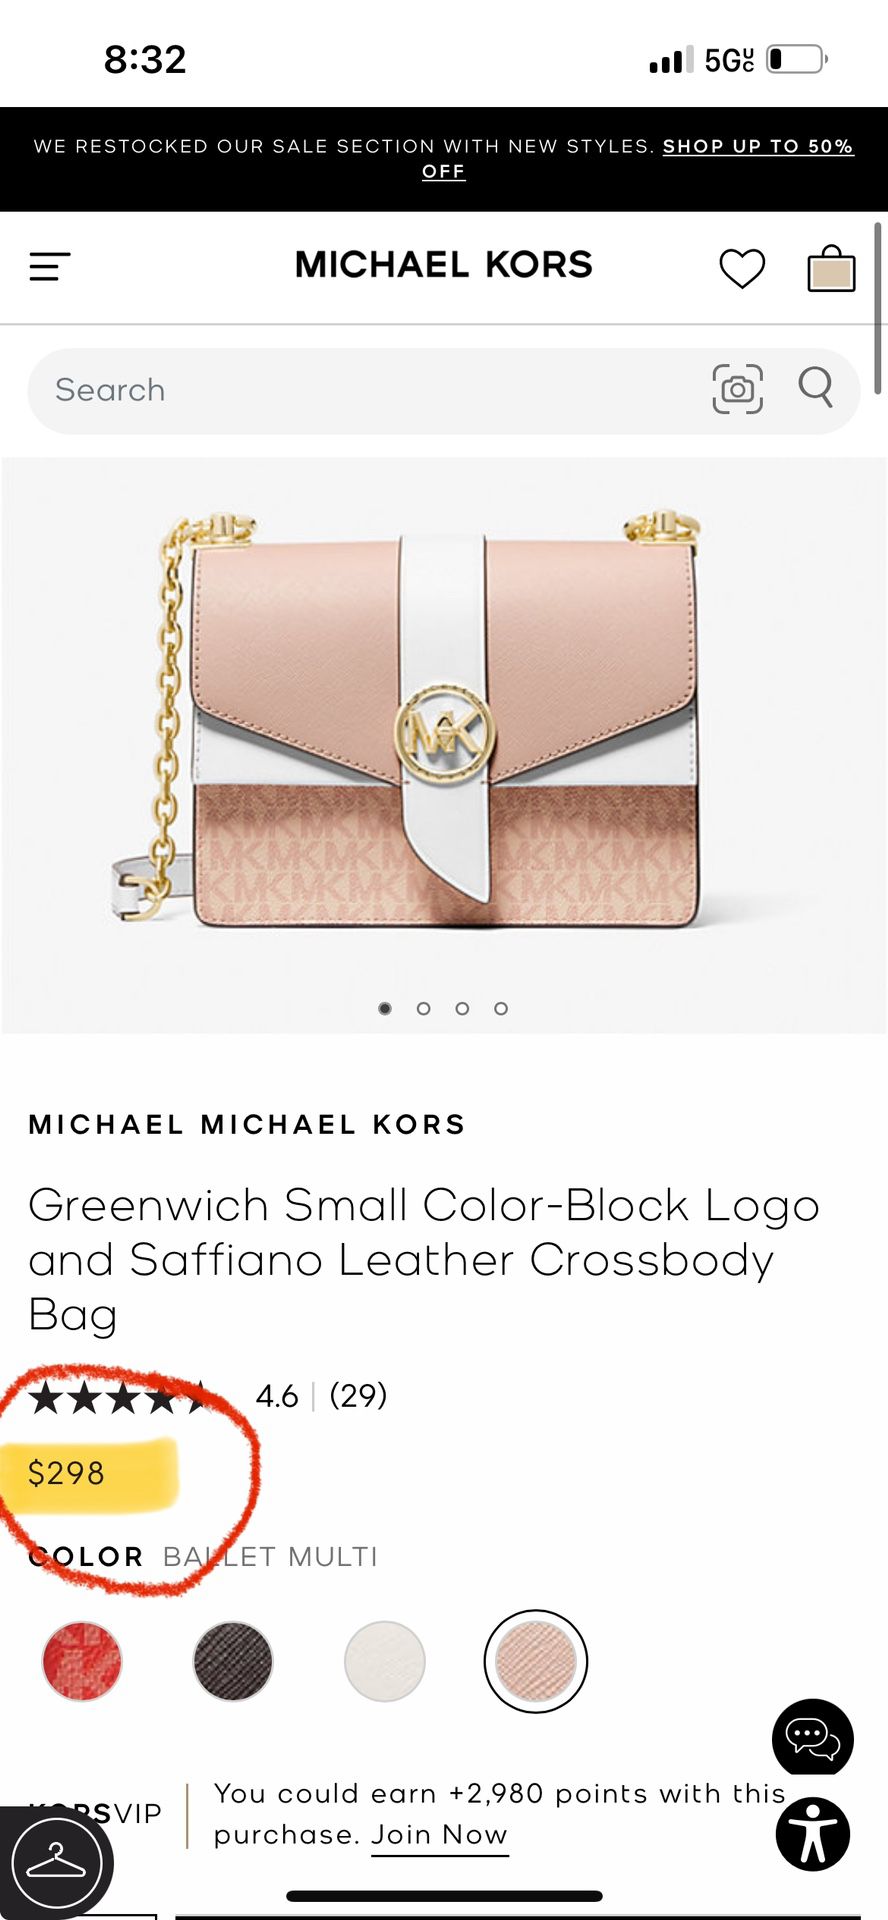 MICHAEL KORS Greenwich Small Color-Block Logo and Saffiano Leather Crossbody Bag